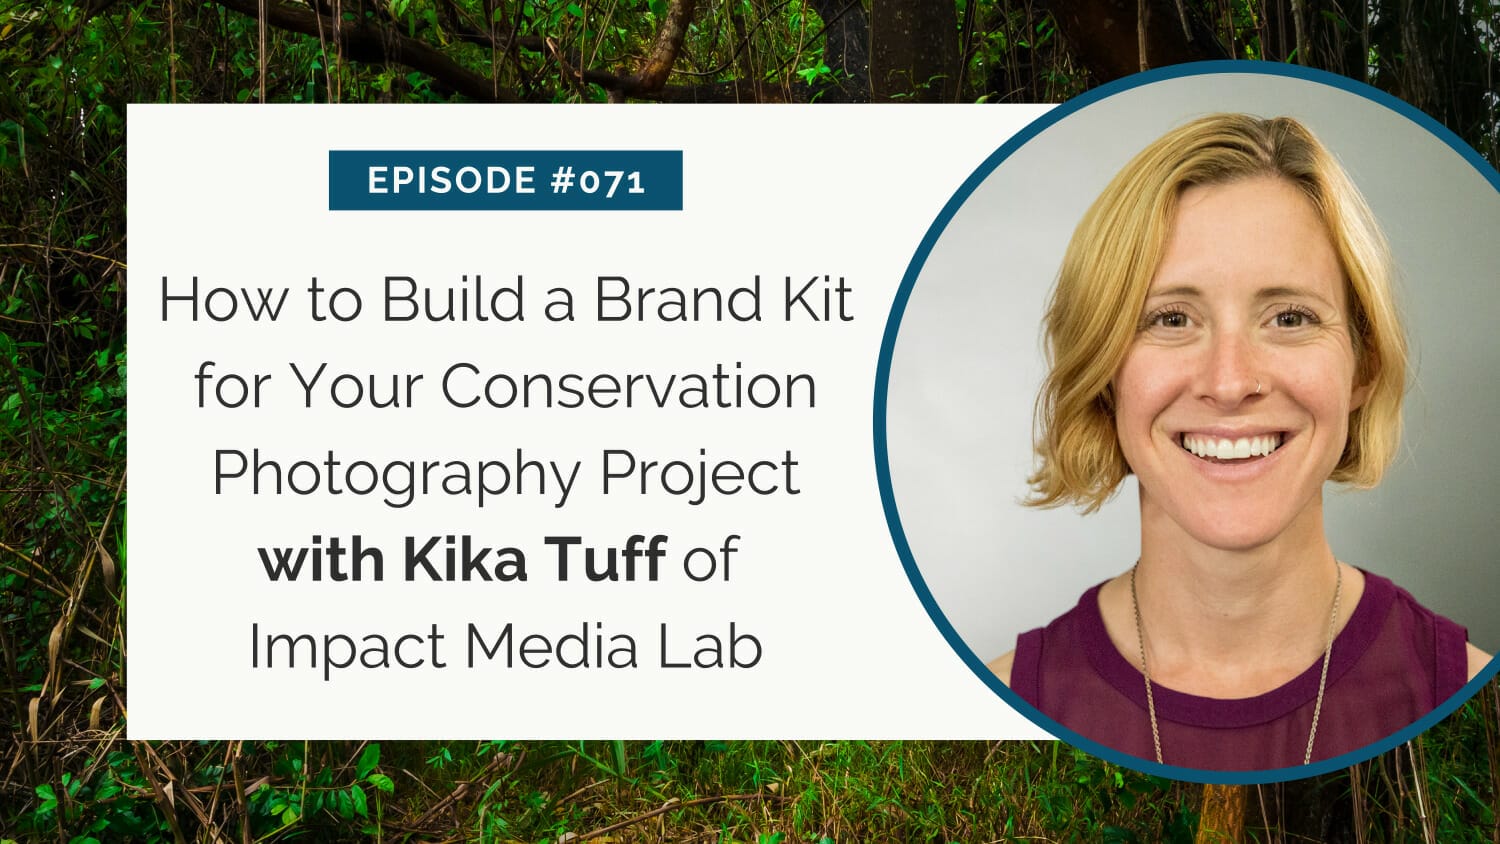 A woman smiling in a promotional graphic for an episode on building a brand kit for conservation photography featuring kika tuff of impact media lab.